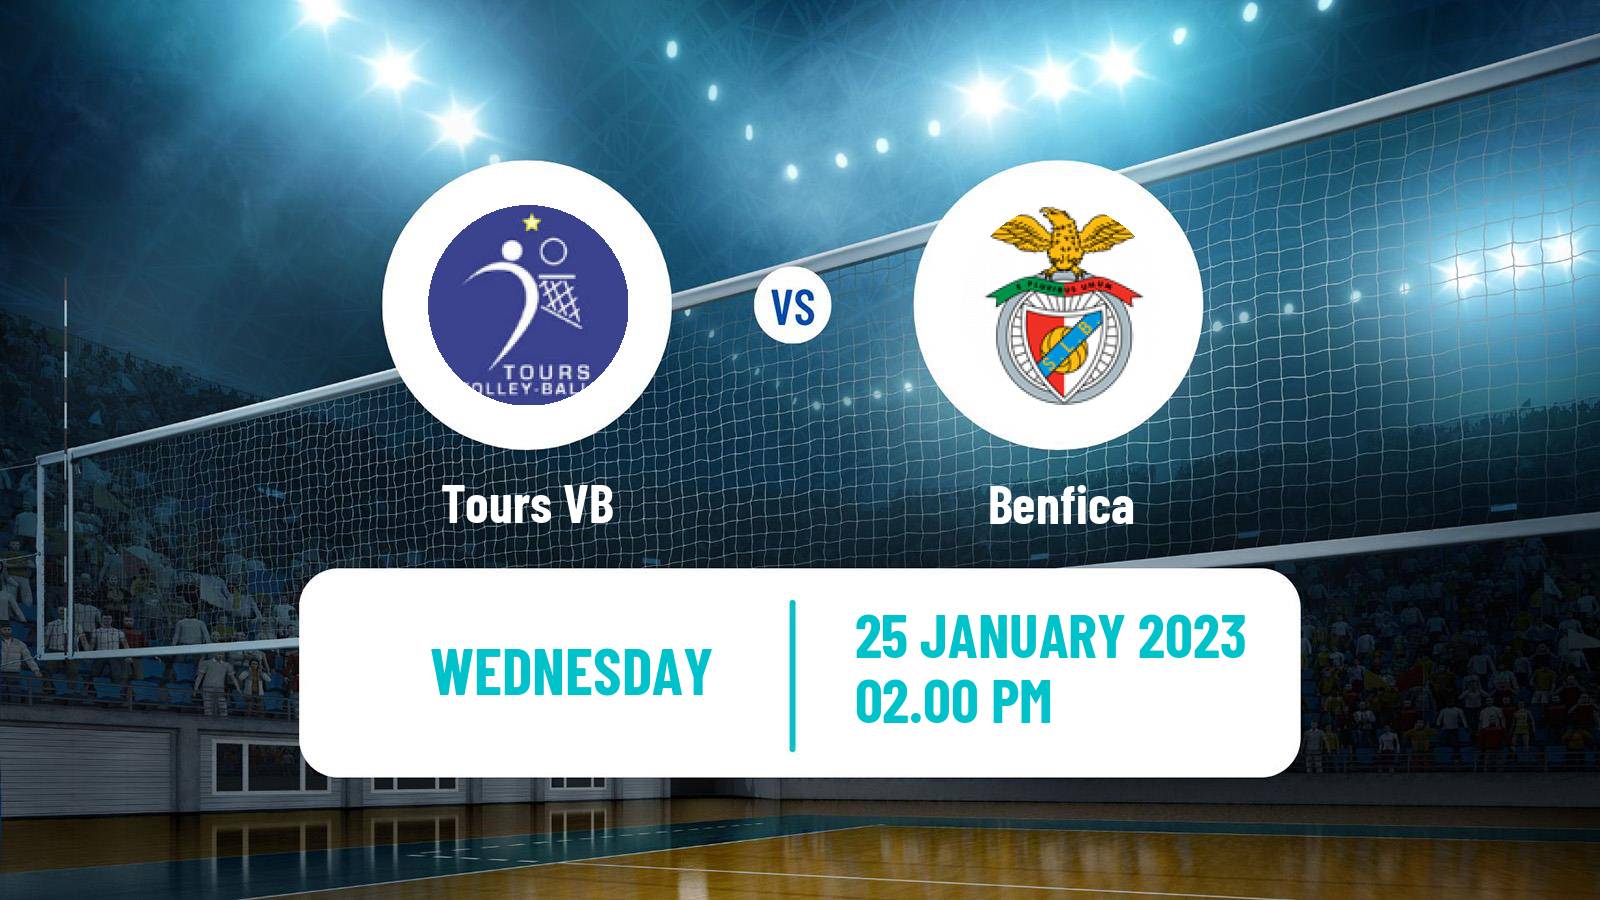 Volleyball CEV Champions League Tours VB - Benfica